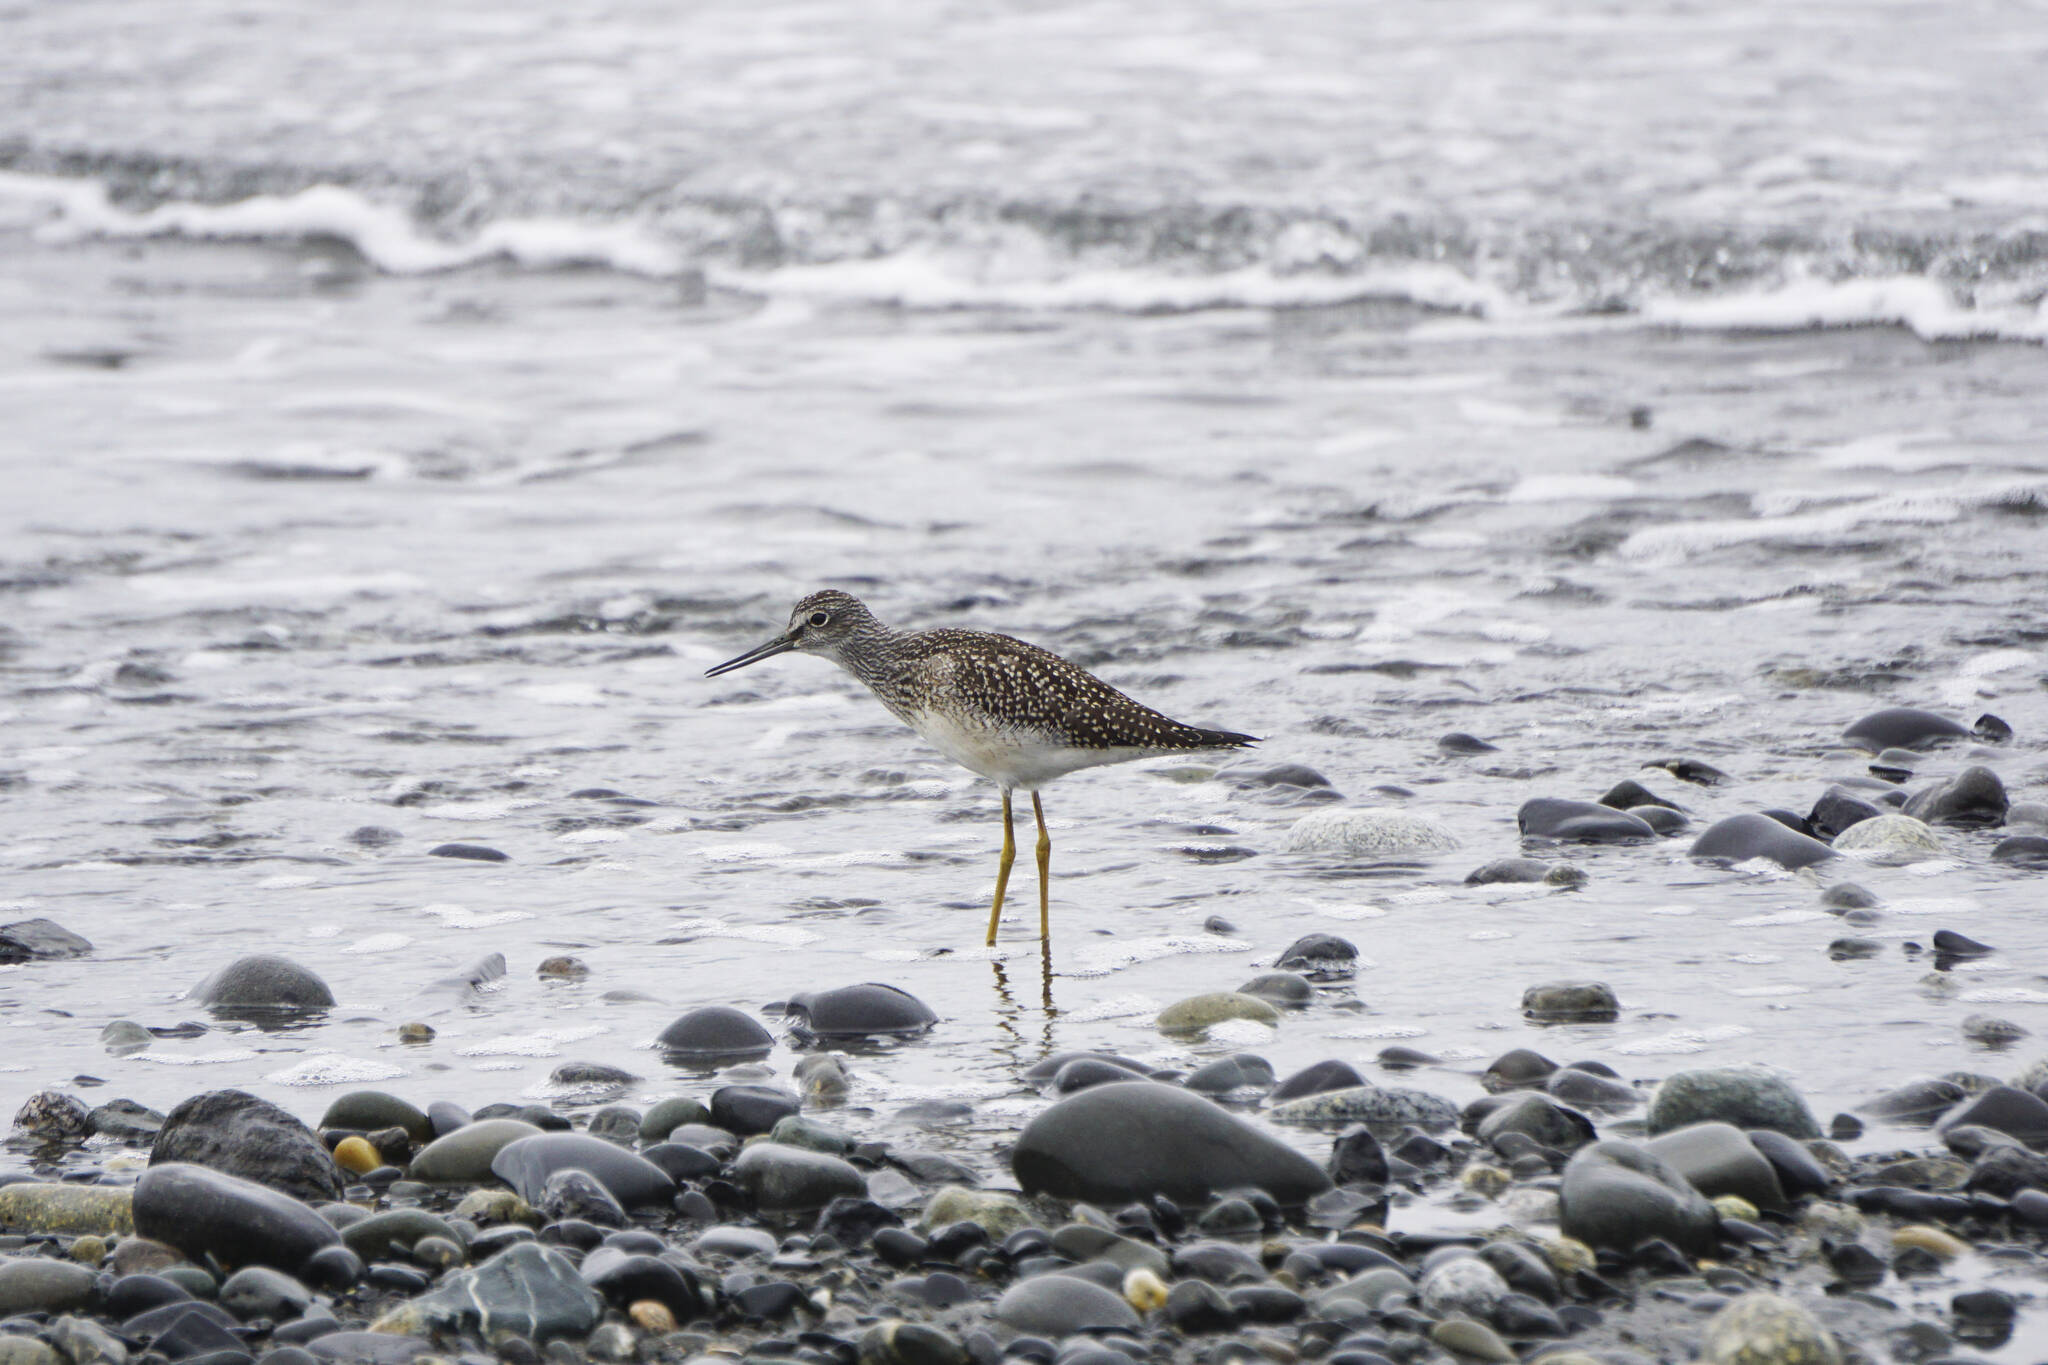 A greater yellowlegs walks along the beach on Monday, Aug. 8, 2022, at Mariner Park in Homer, Alaska. (Photo by Michael Armstrong/Homer News)